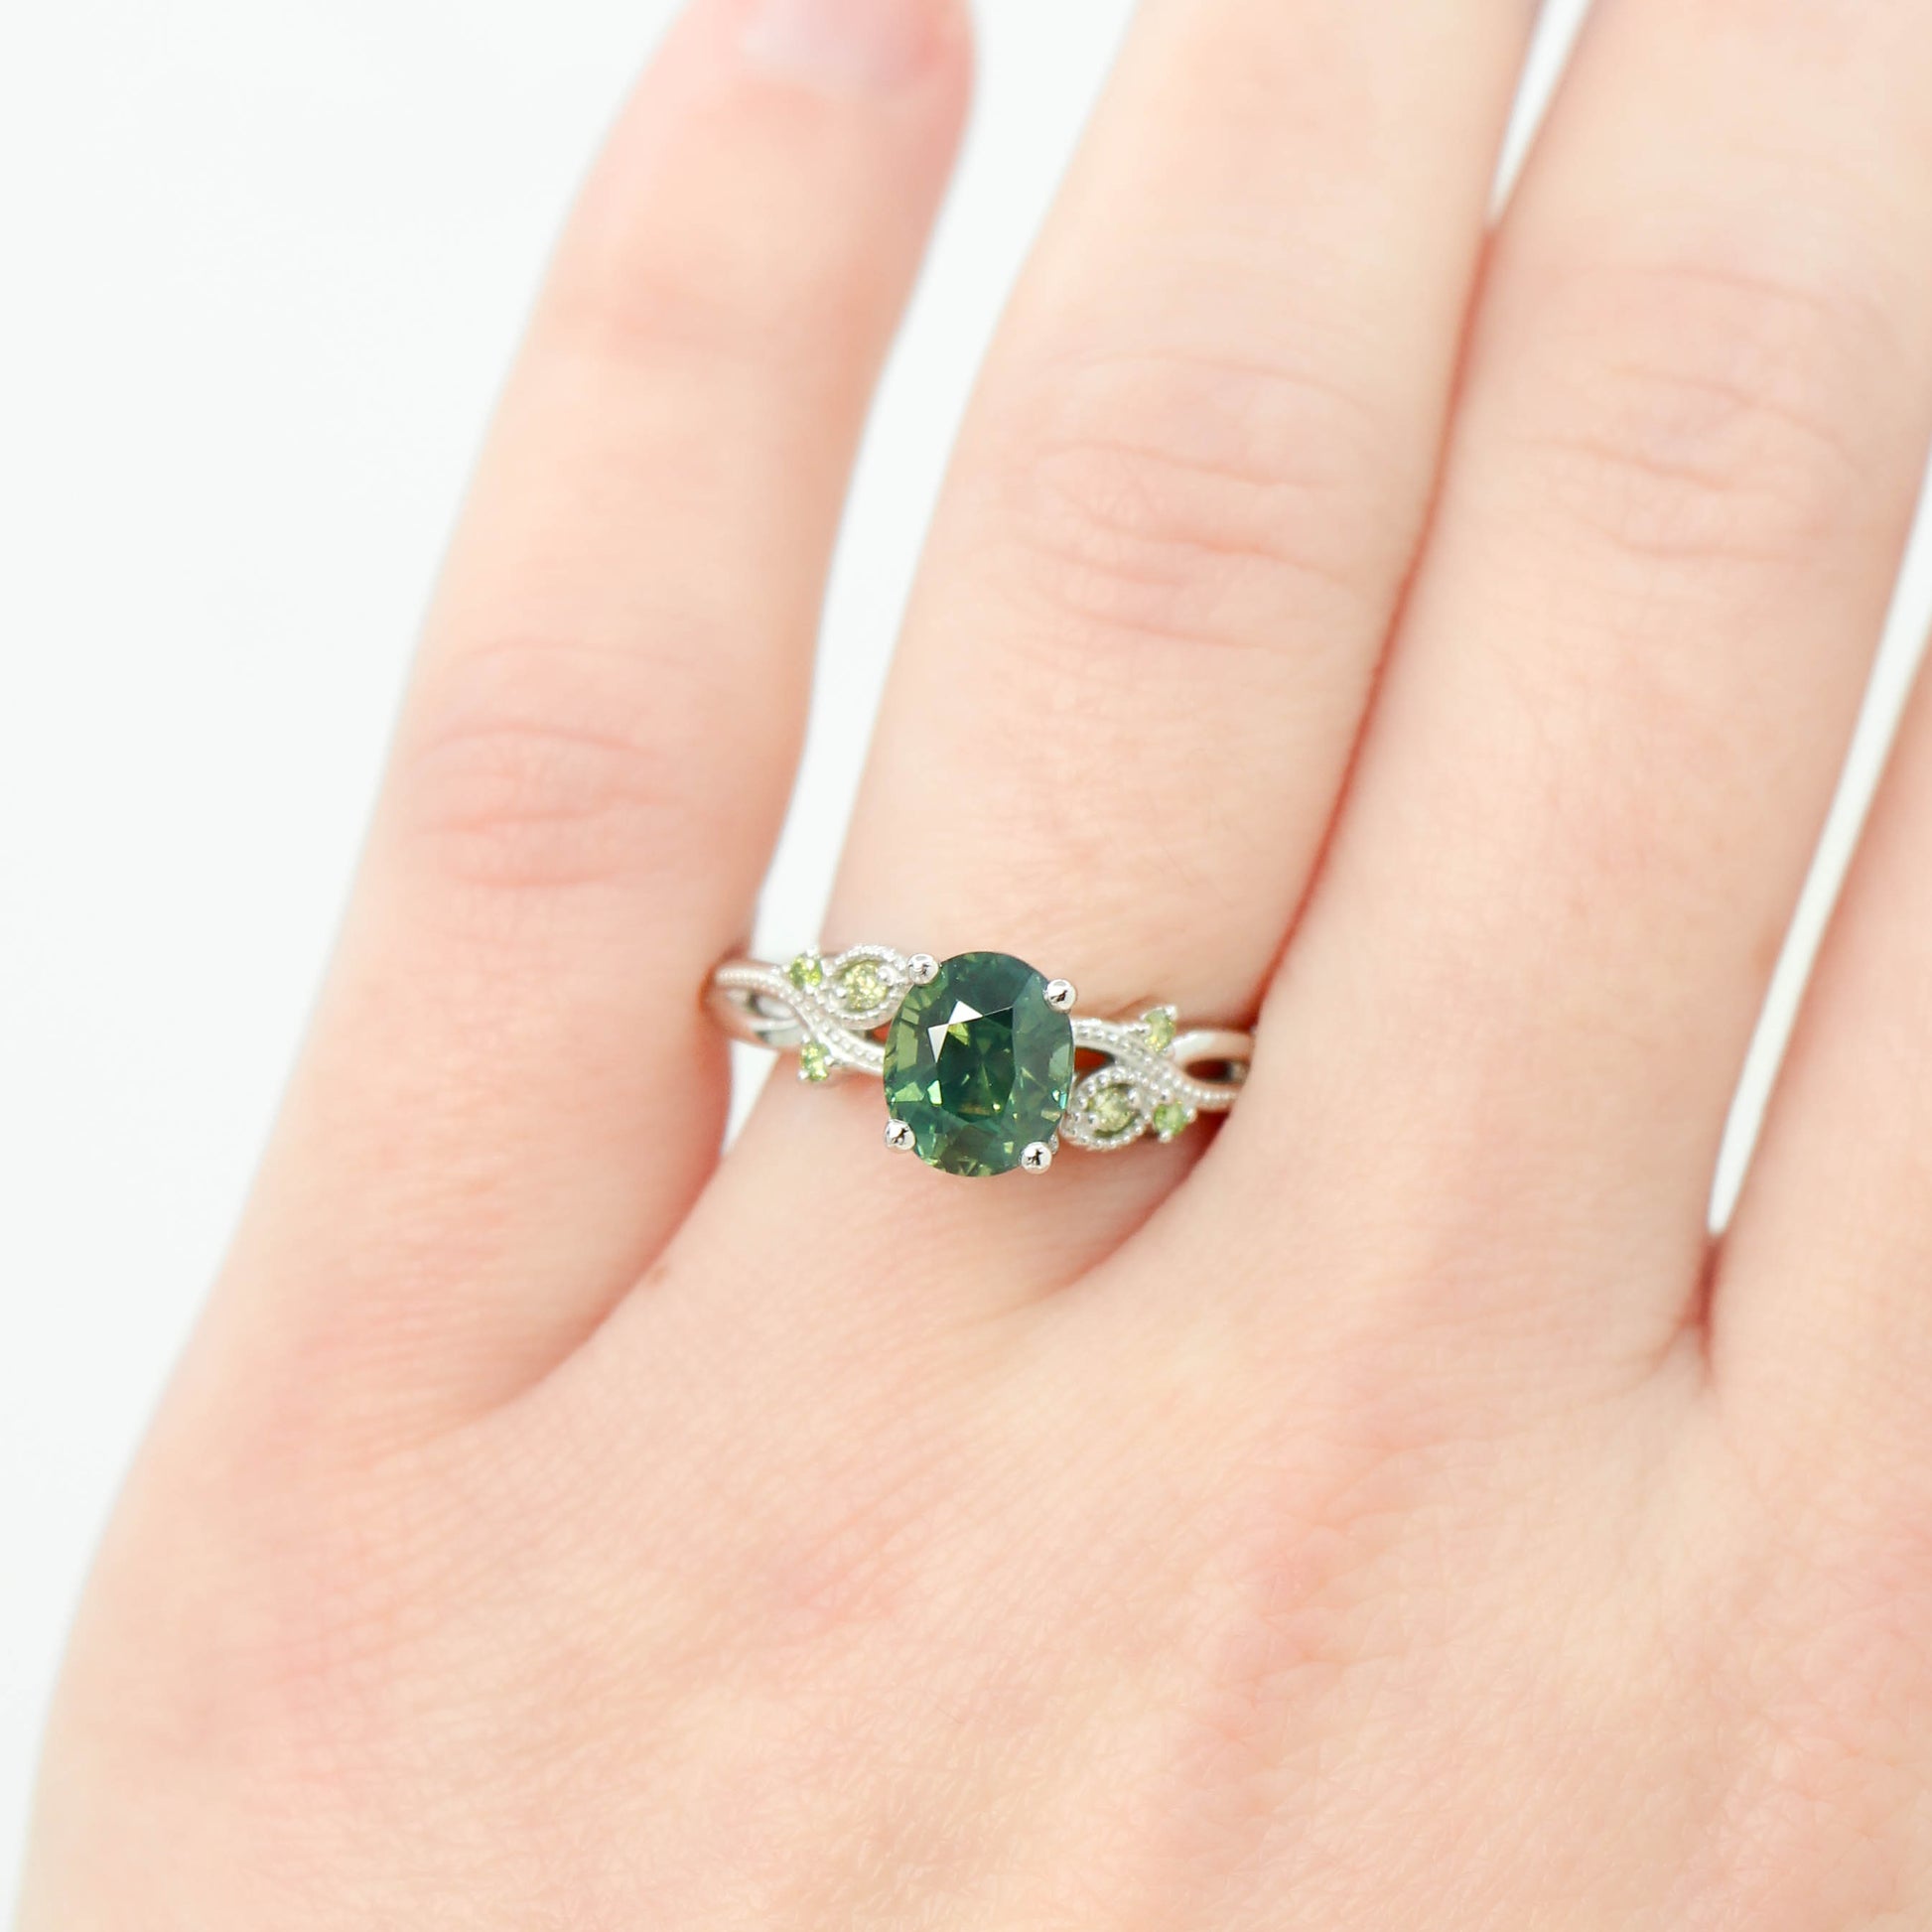 Jasmine Ring with a 2.18 Carat Oval Green Sapphire and Light Green Diamond Accents in Platinum - Ready to Size and Ship - Midwinter Co. Alternative Bridal Rings and Modern Fine Jewelry